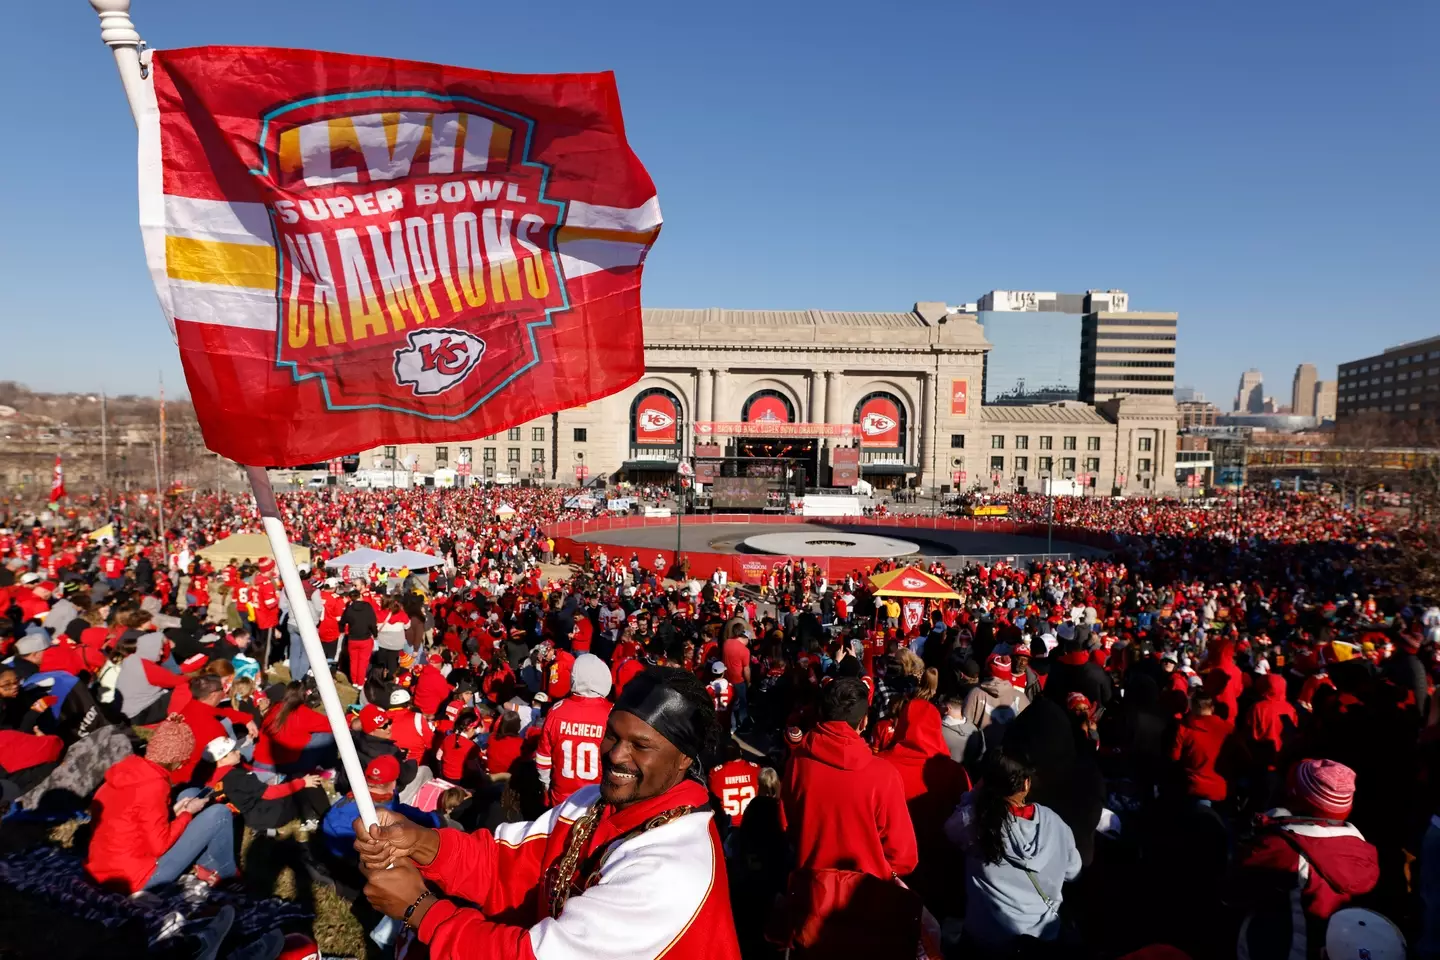 It's reported that 1 million Chiefs fans flocked to attend the parade.